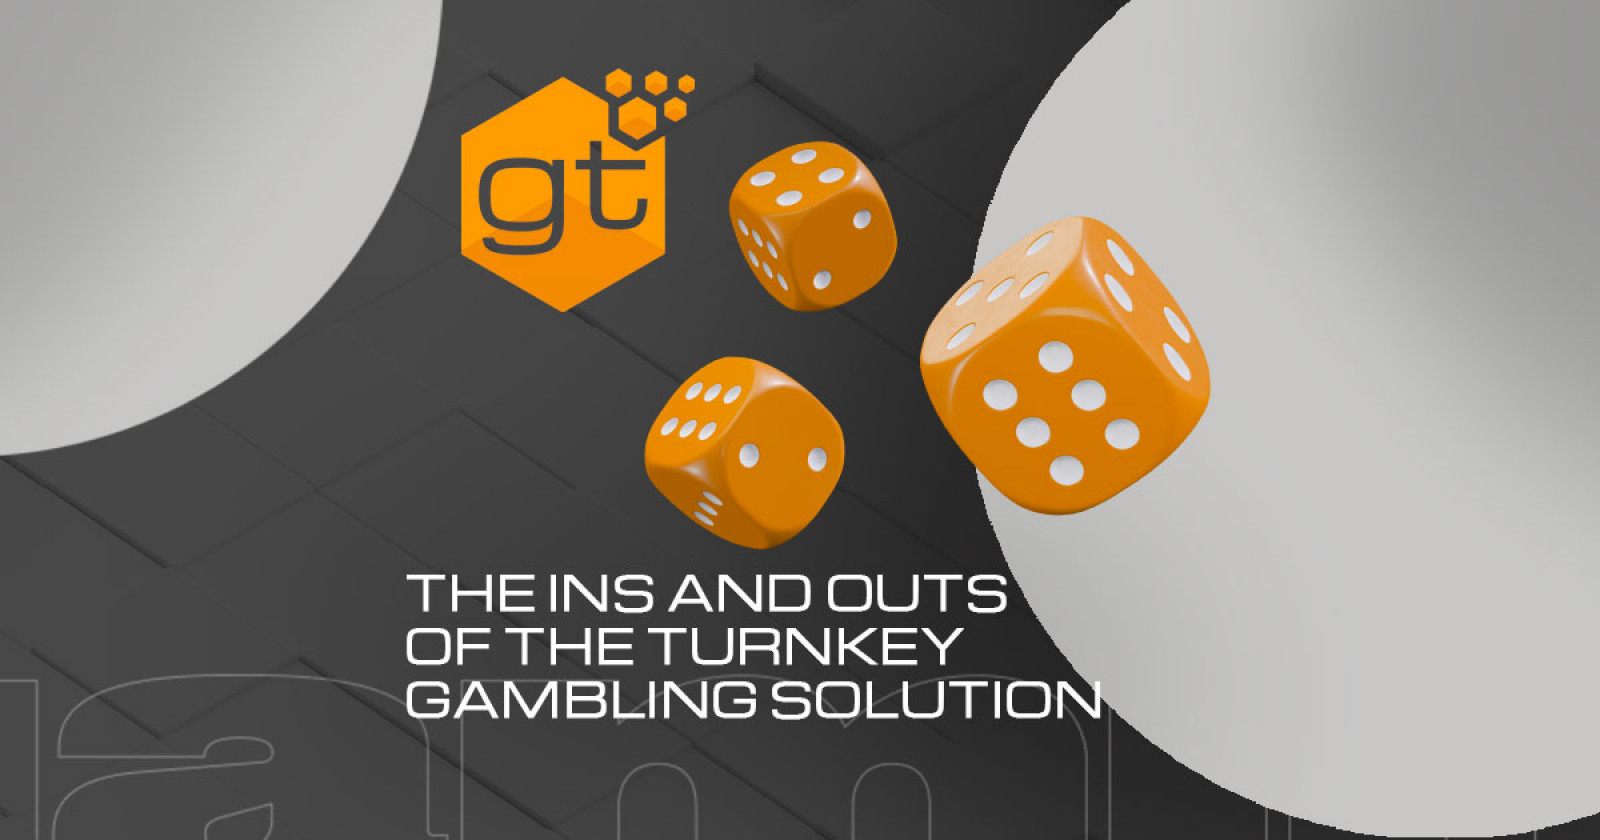 A closer look at the turnkey gambling solution